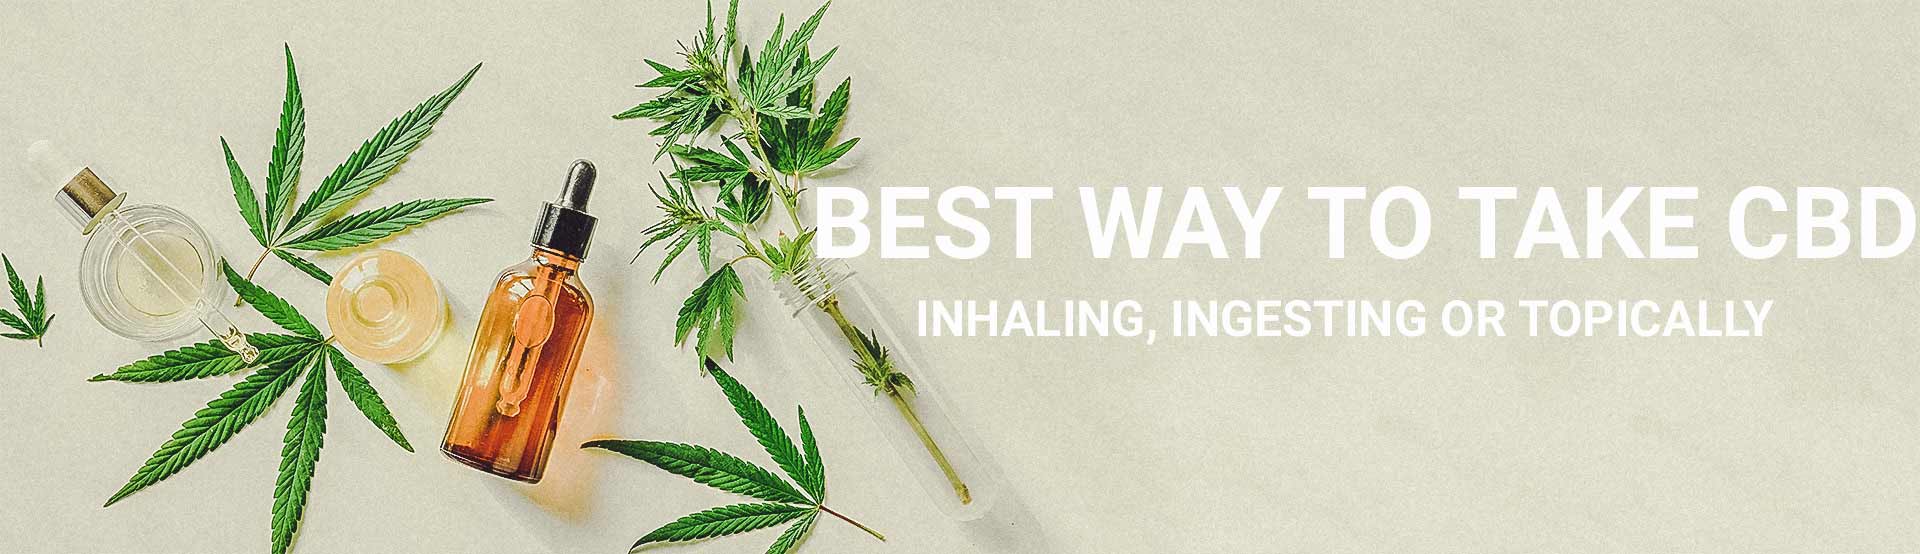 What is the best way to take CBD? Inhaling, ingesting, or topically? Hero image